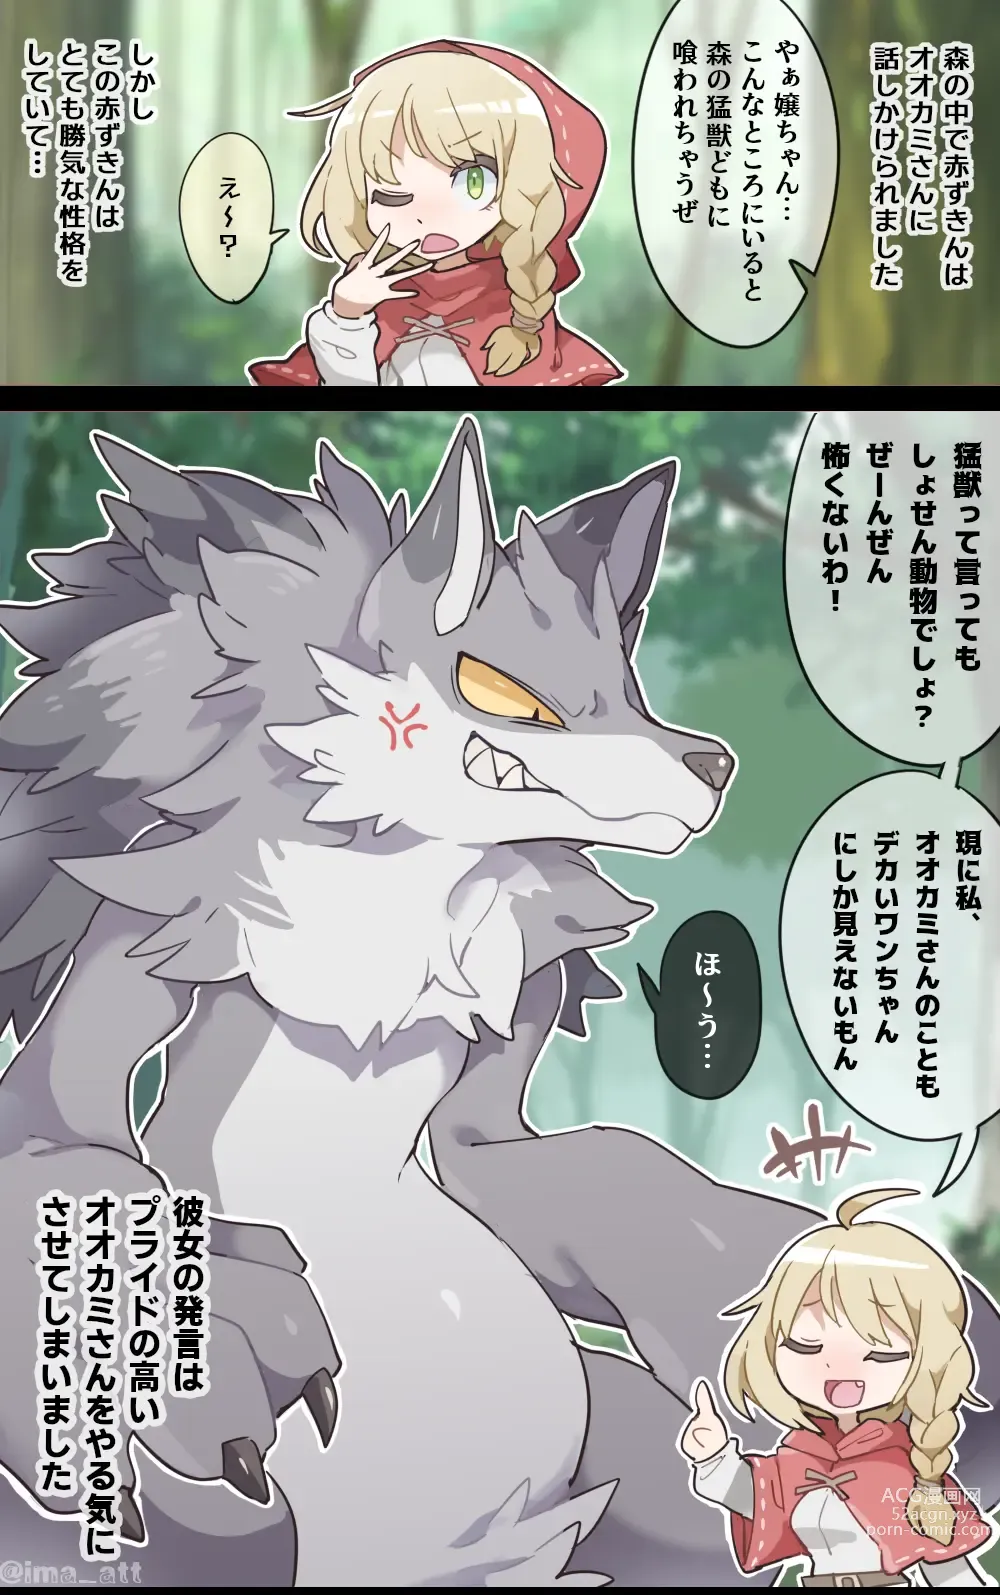 Page 8 of doujinshi The Wolf VORE Little Red Riding Hood